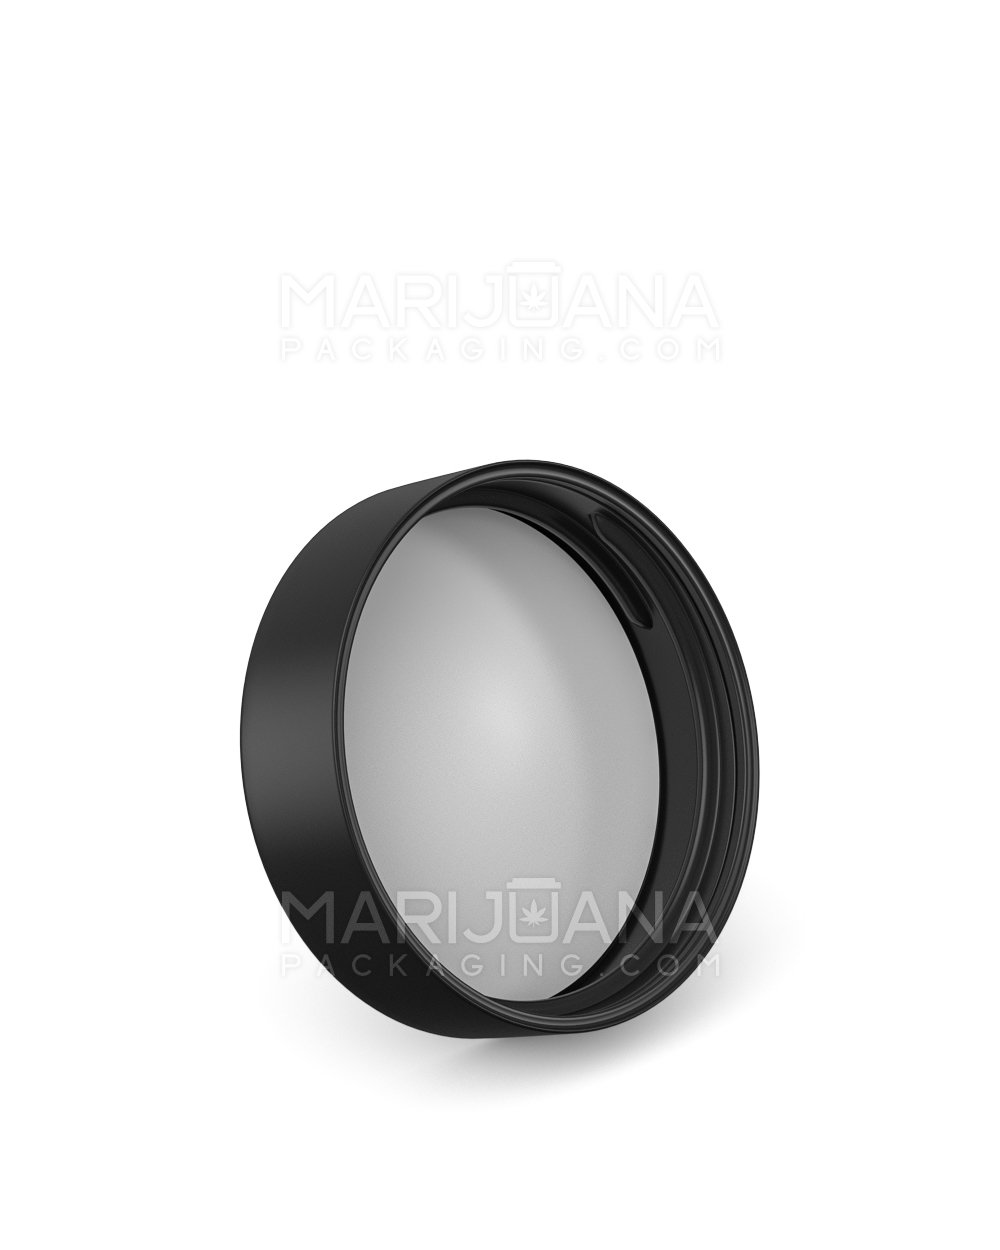 Child Resistant & Sustainable | Recyclable Push & Turn Reclaimed Ocean Plastic Caps w/ Foam Liner | 53mm - Matte Black  - 2